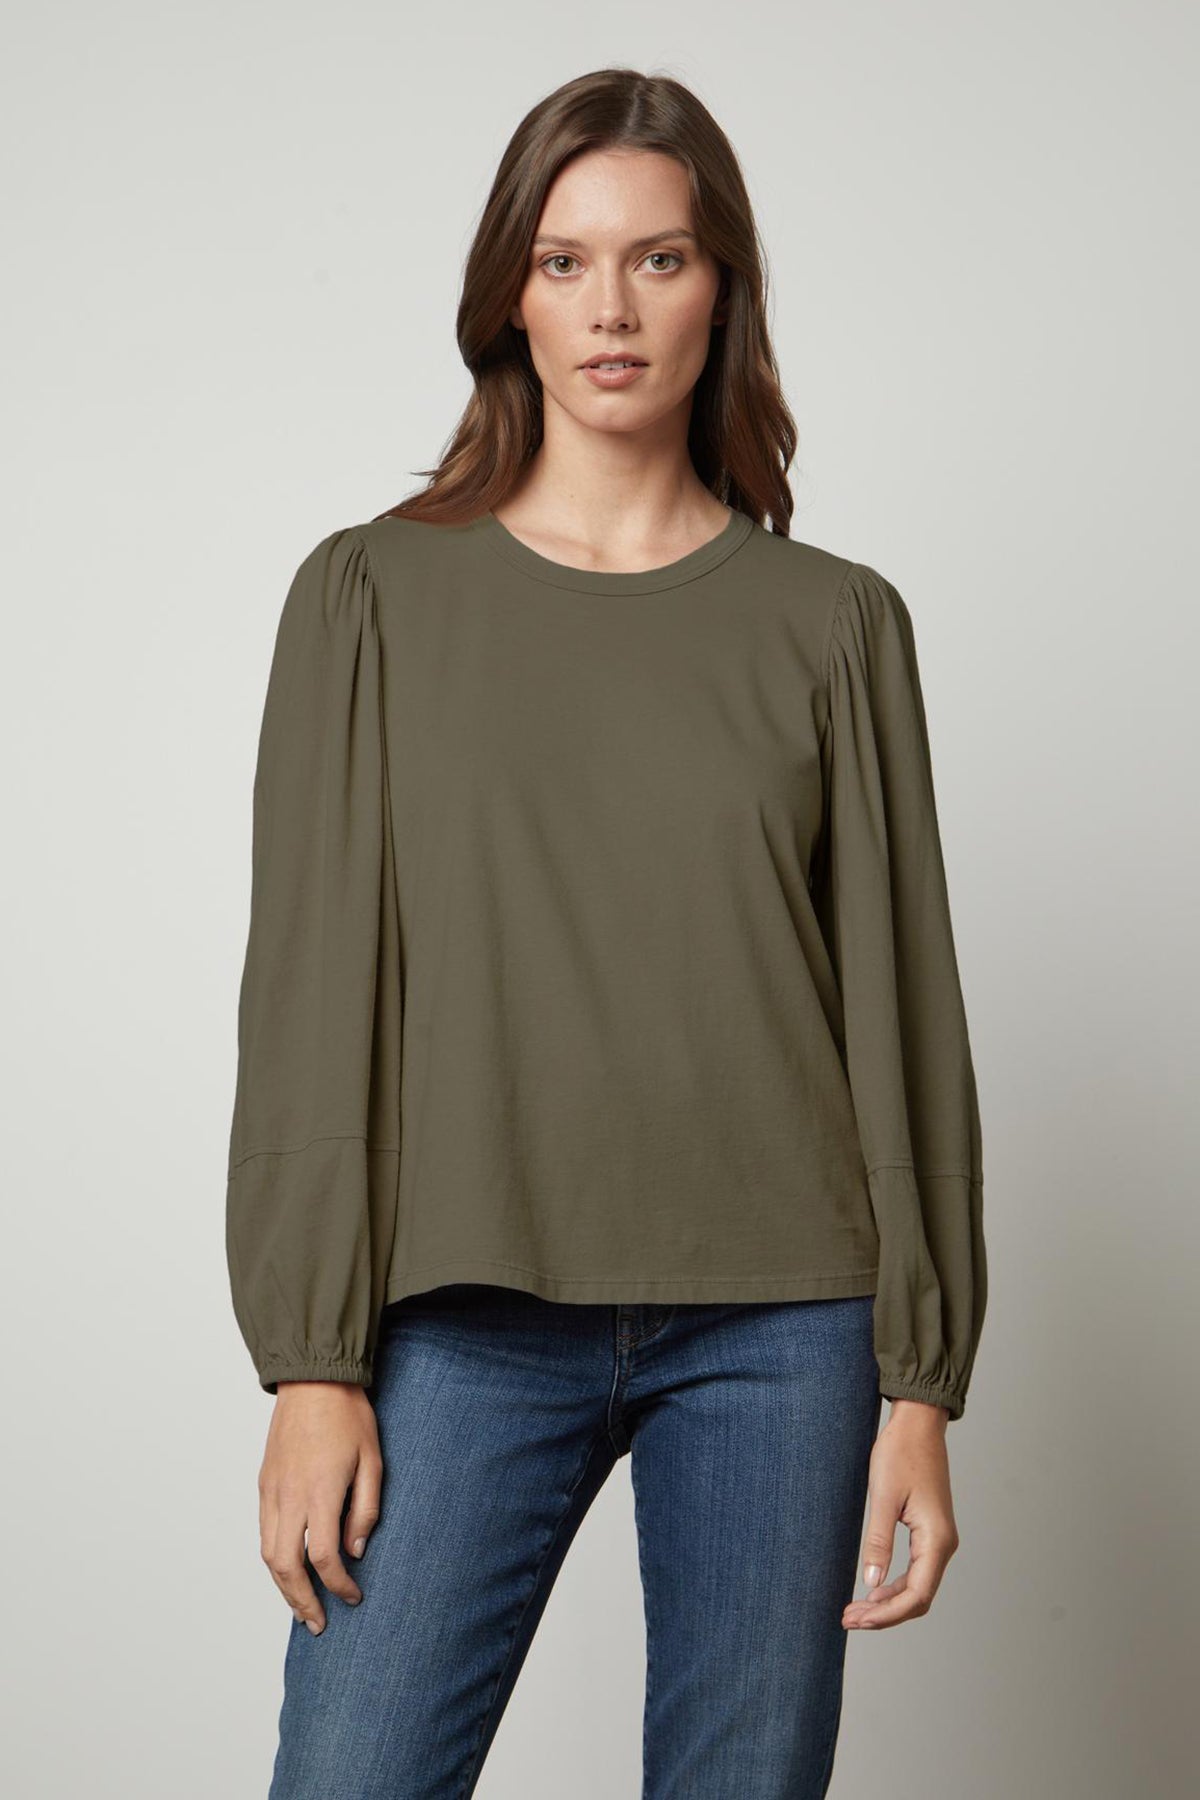 The Jetty Crew Neck Tee by Velvet by Graham & Spencer features an olive green puff sleeve top with a banded neckline and long sleeves.-35660271550657